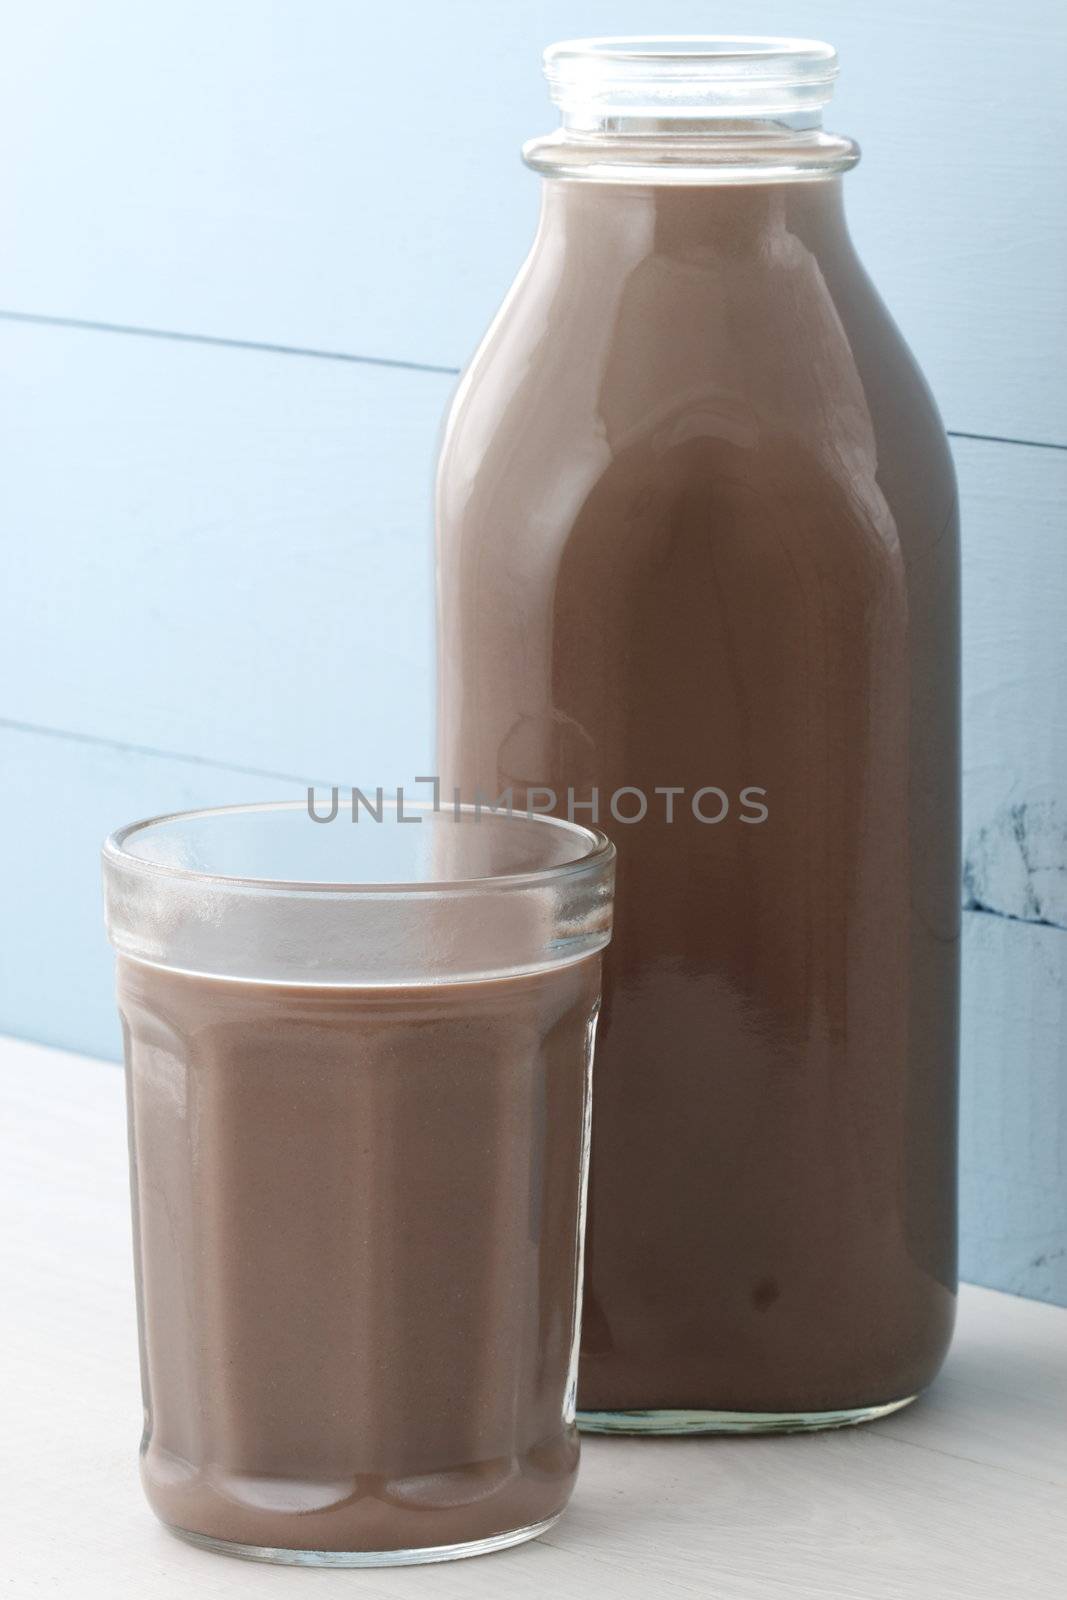 Delicious, nutritious and fresh Chocolate bottle, made with organic real cocoa mass